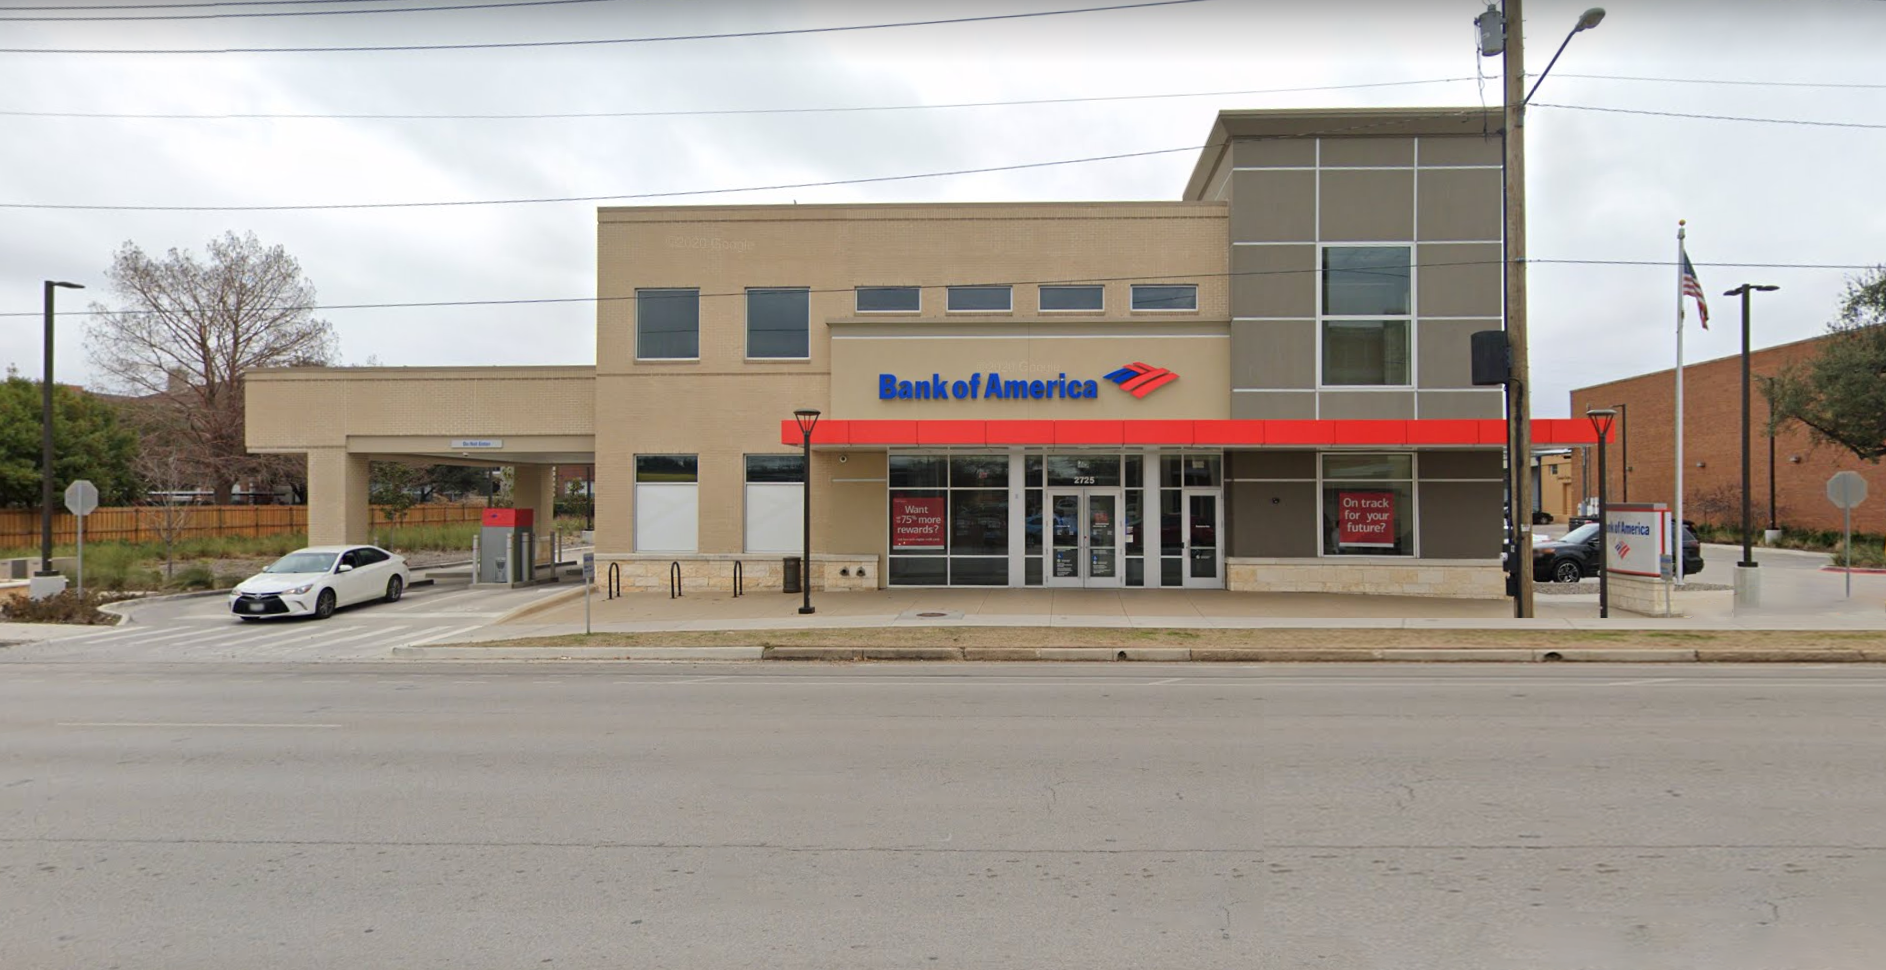 Bank of America financial center with drive-thru ATM | 2725 W 7th St, Fort Worth, TX 76107